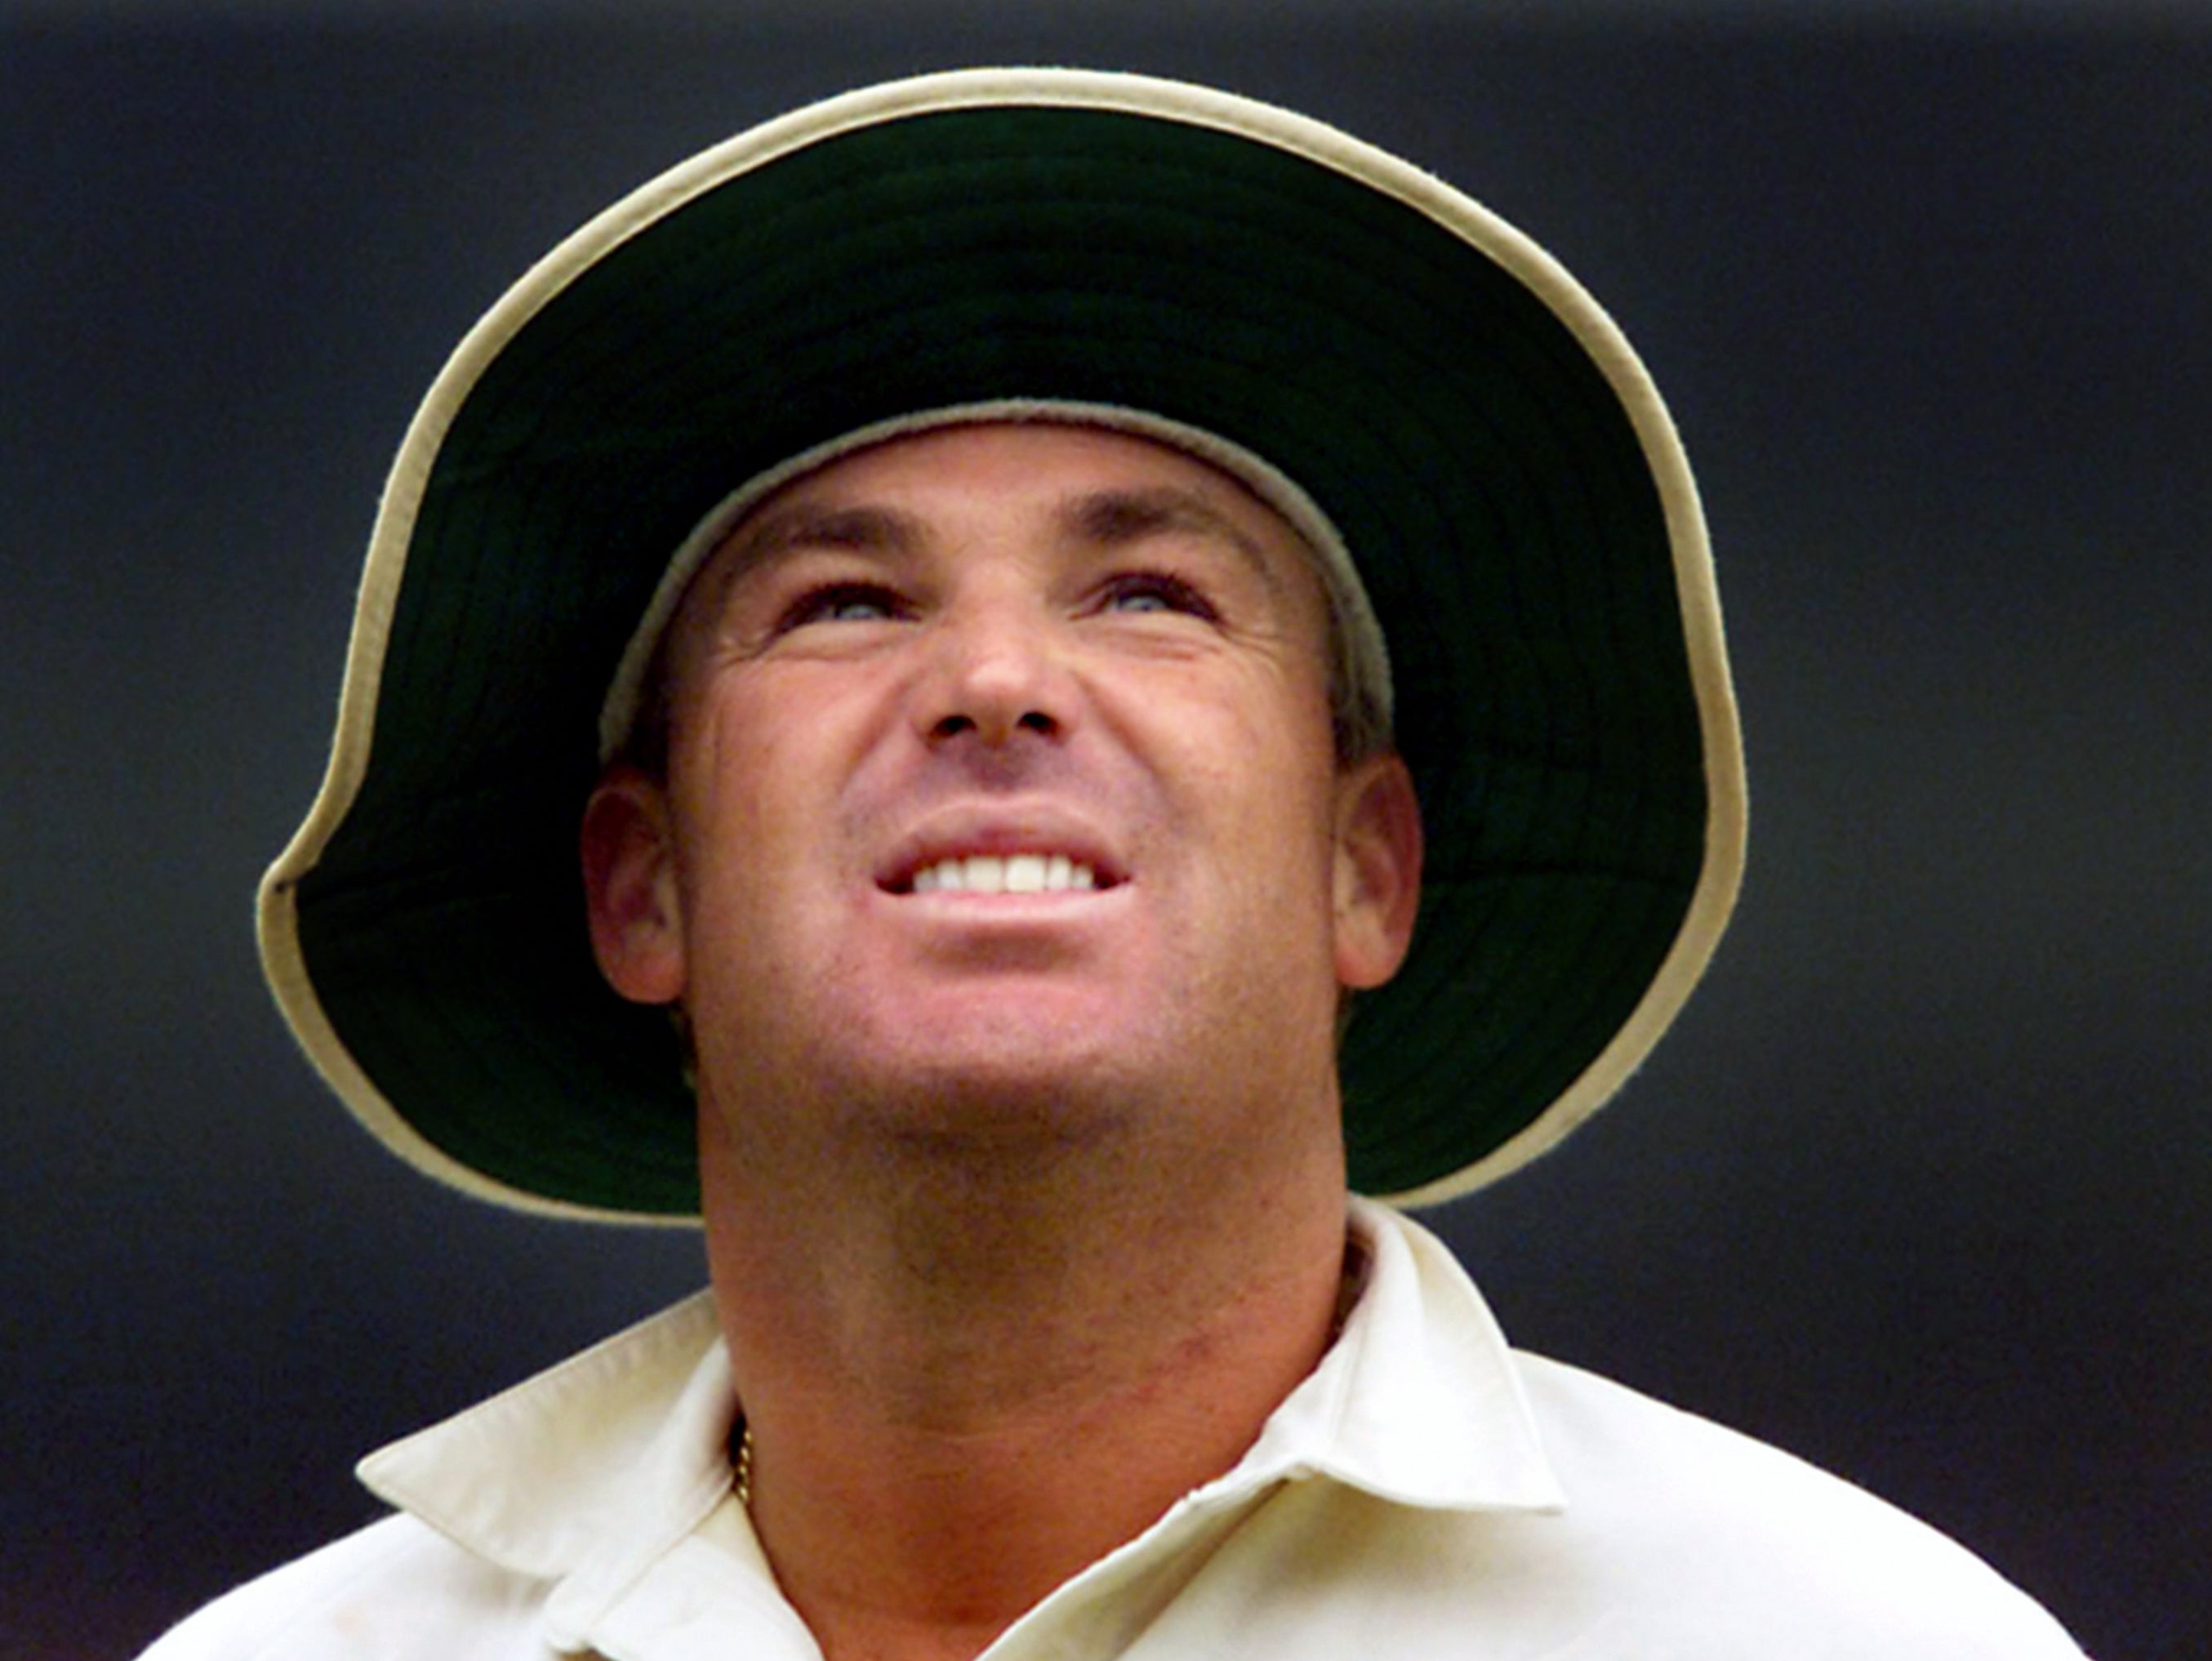 Australia’s Shane Warne during a Test match against England in 2001